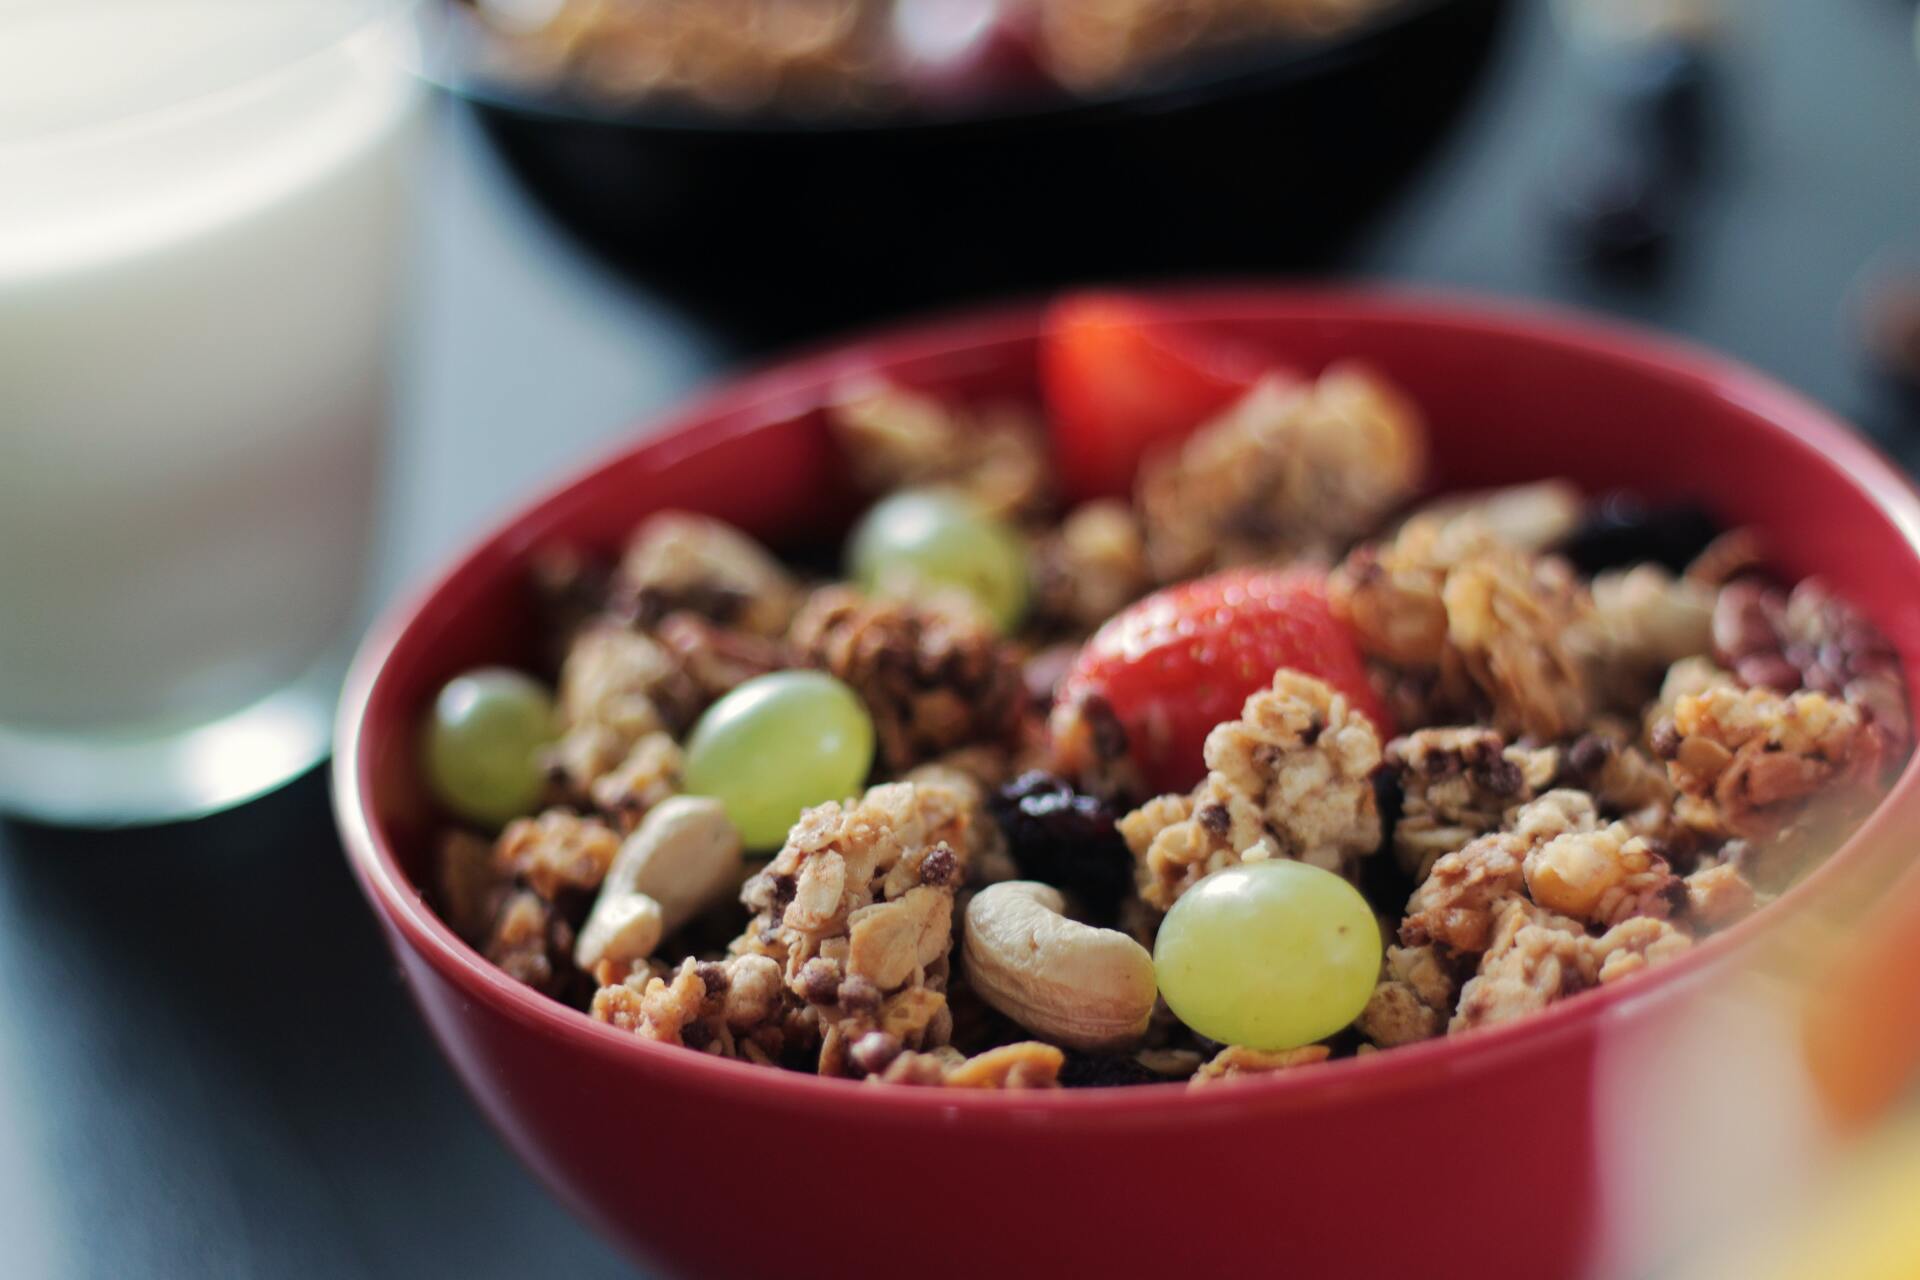 Bowl of cereal fiber with fruit and nuts